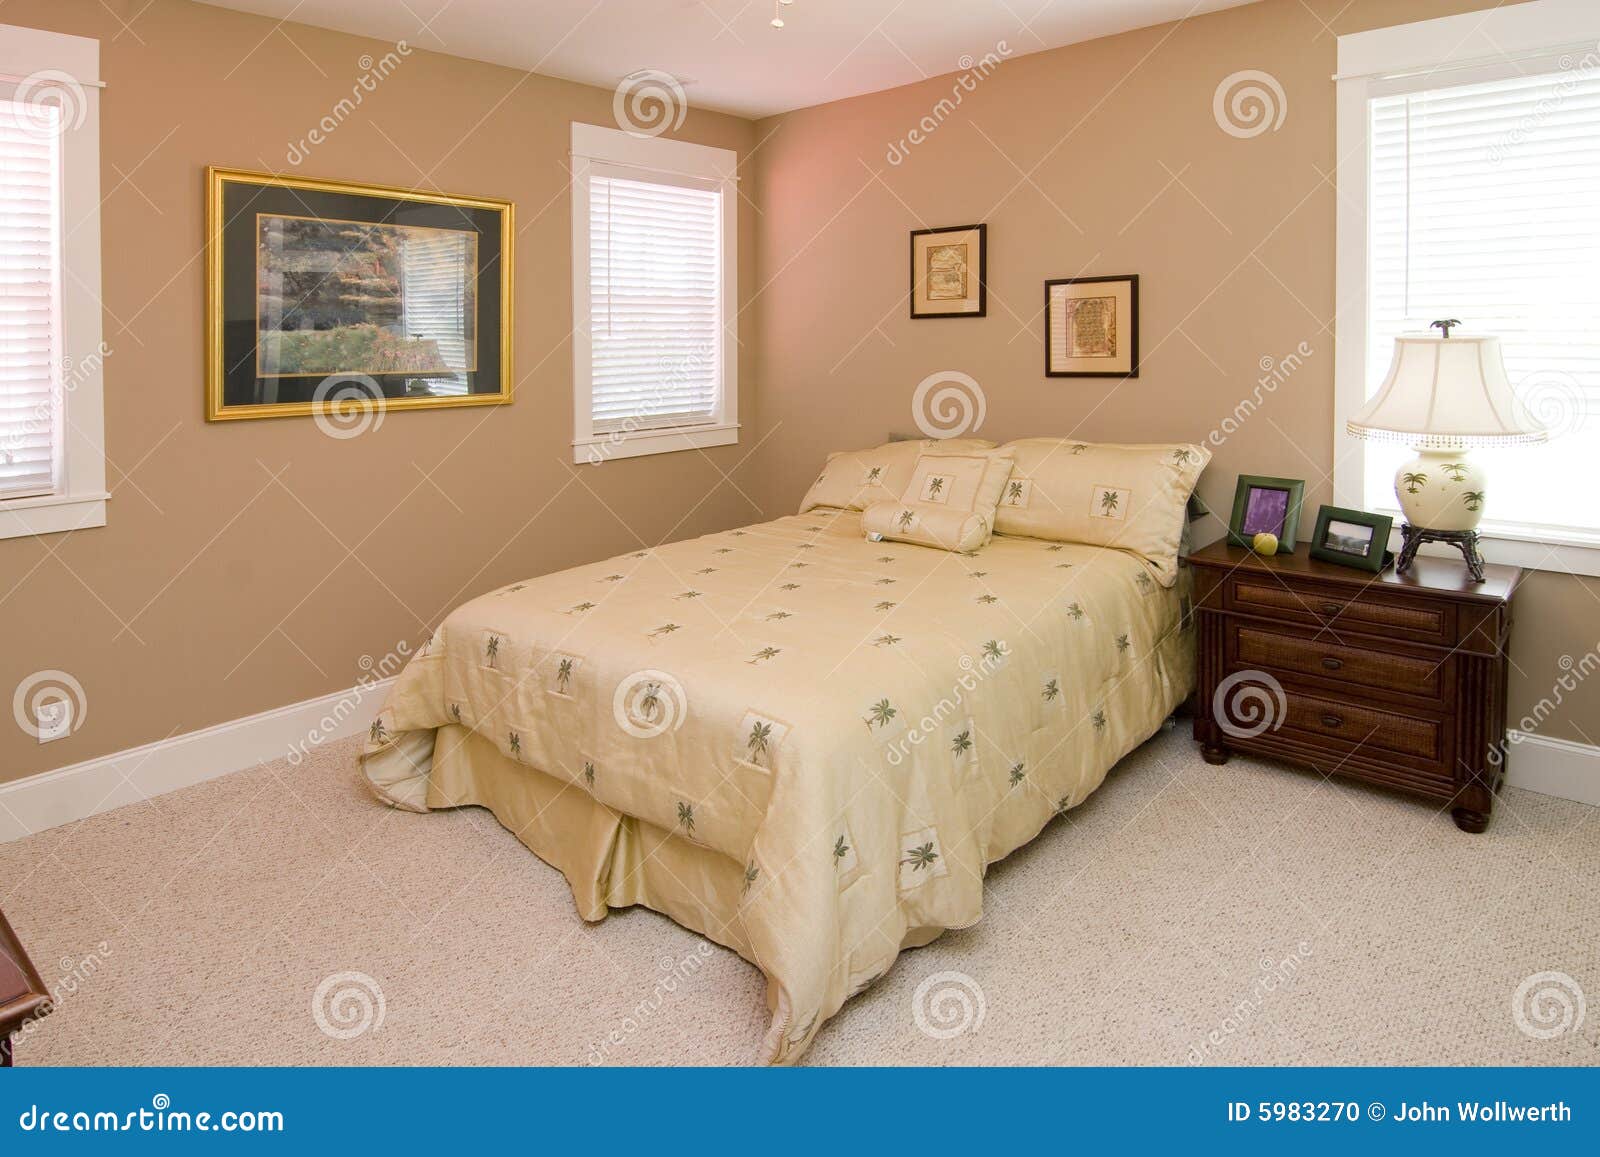 Simple Coral Color Bedroom Stock Photo Image Of Decor 5983270